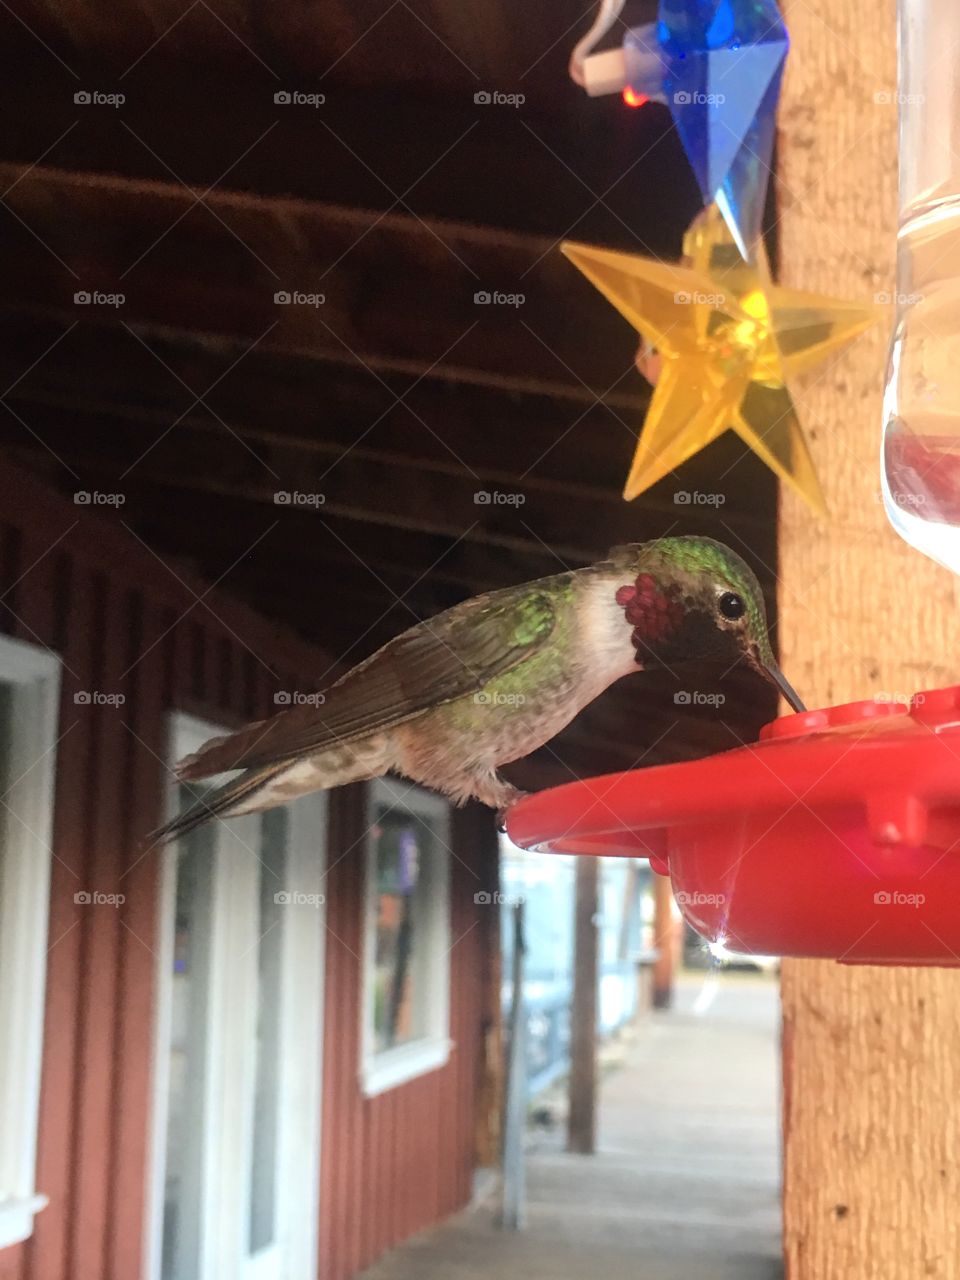 Hummingbird sitting in a bird feeder hanging from an awning of a shop in a mountain resort town.